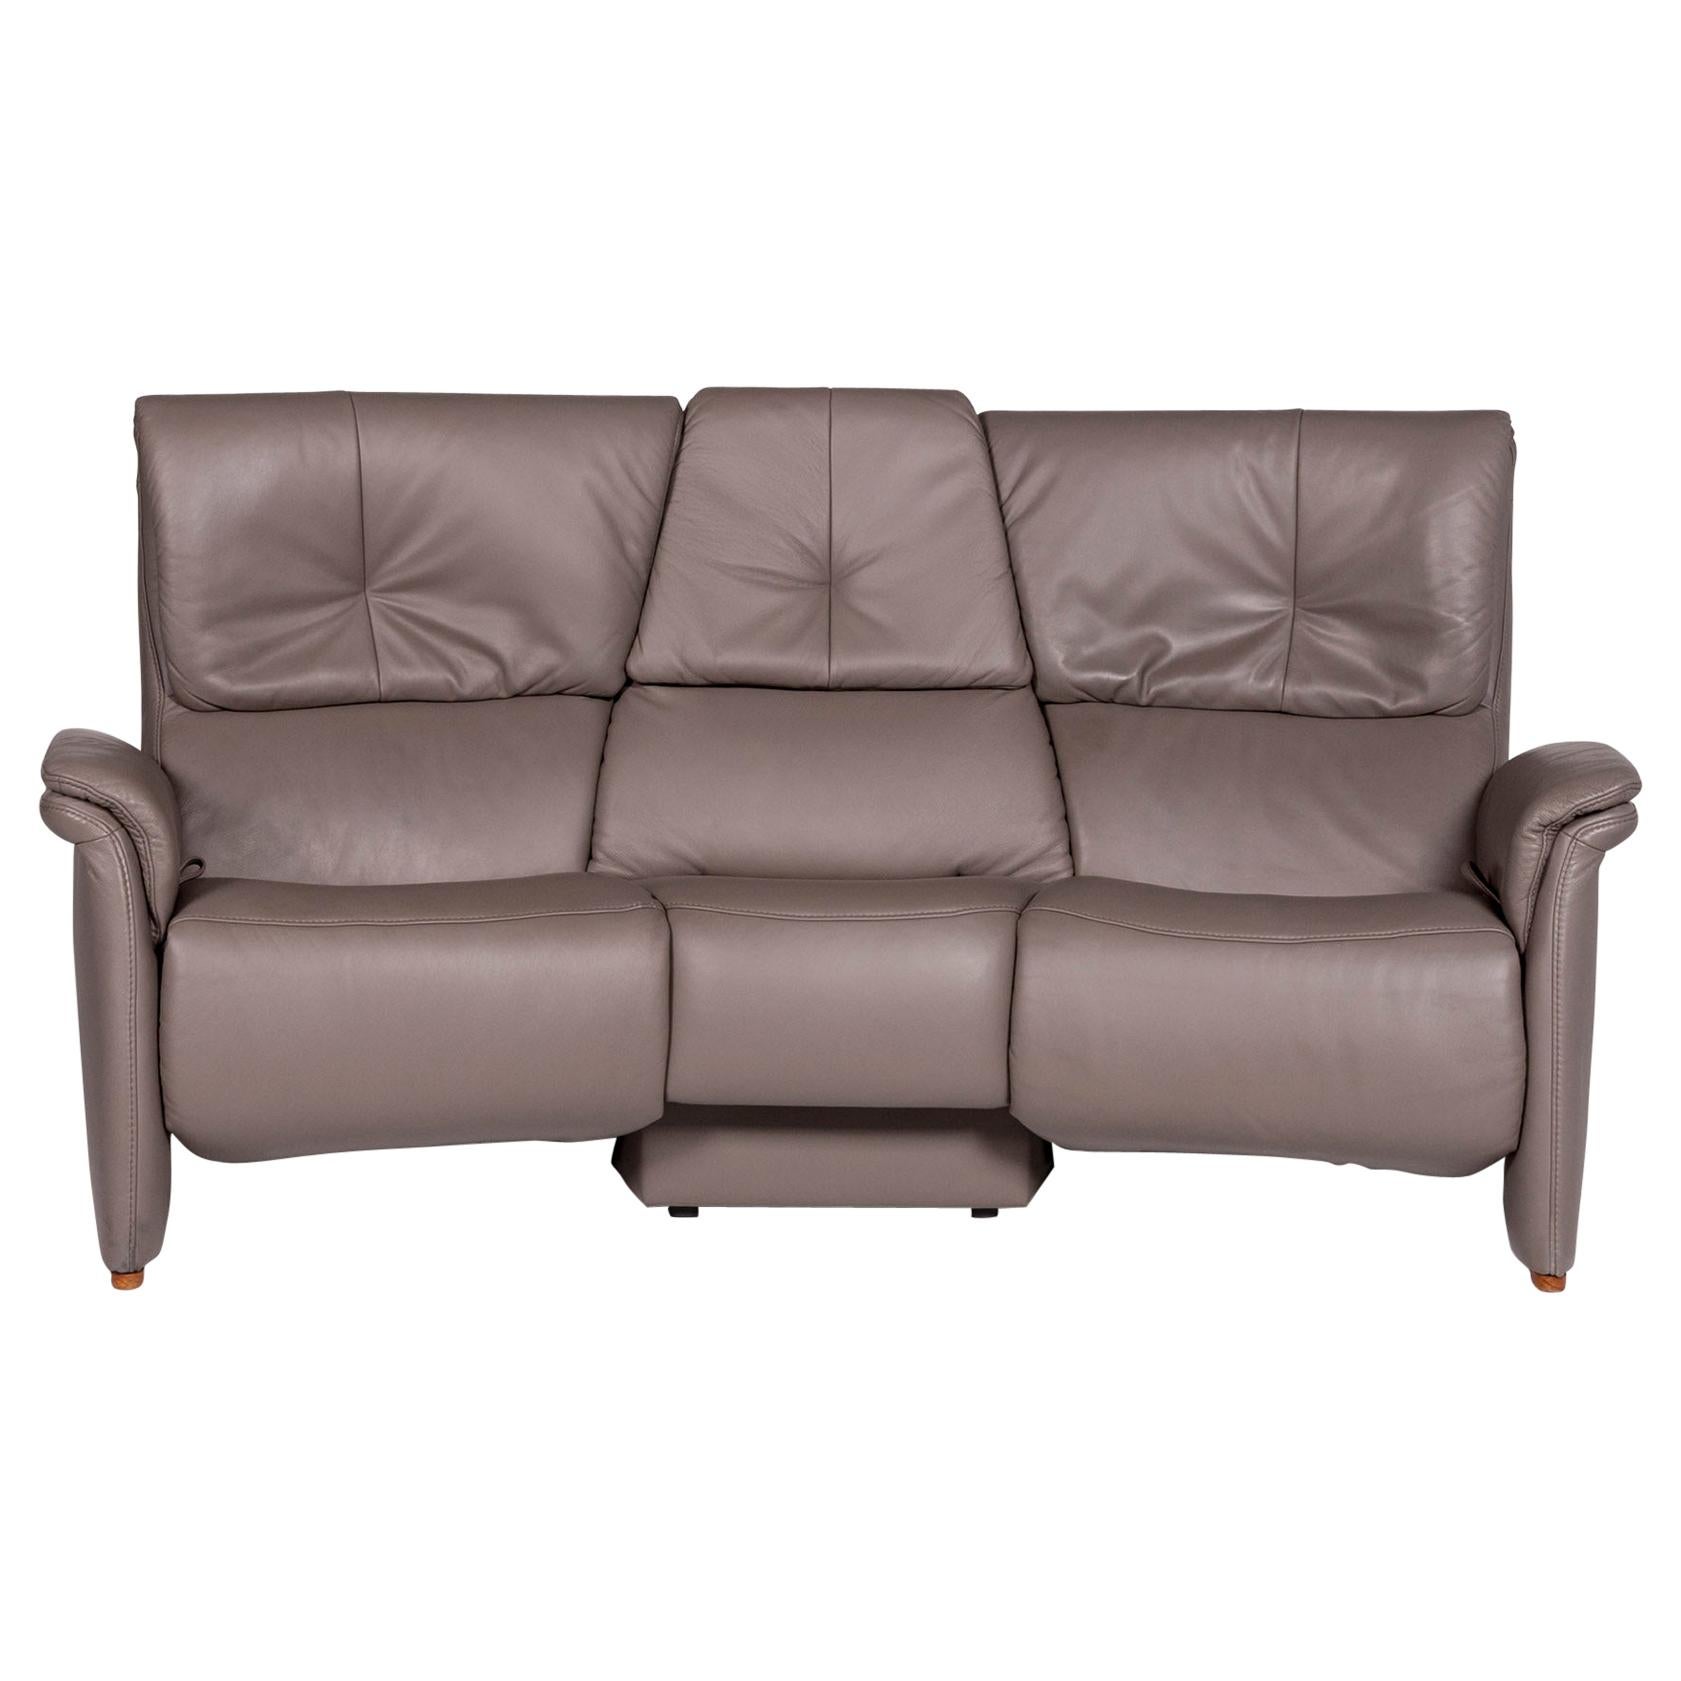 Himolla Leather Sofa Gray Two-Seat Relax Function Function Couch